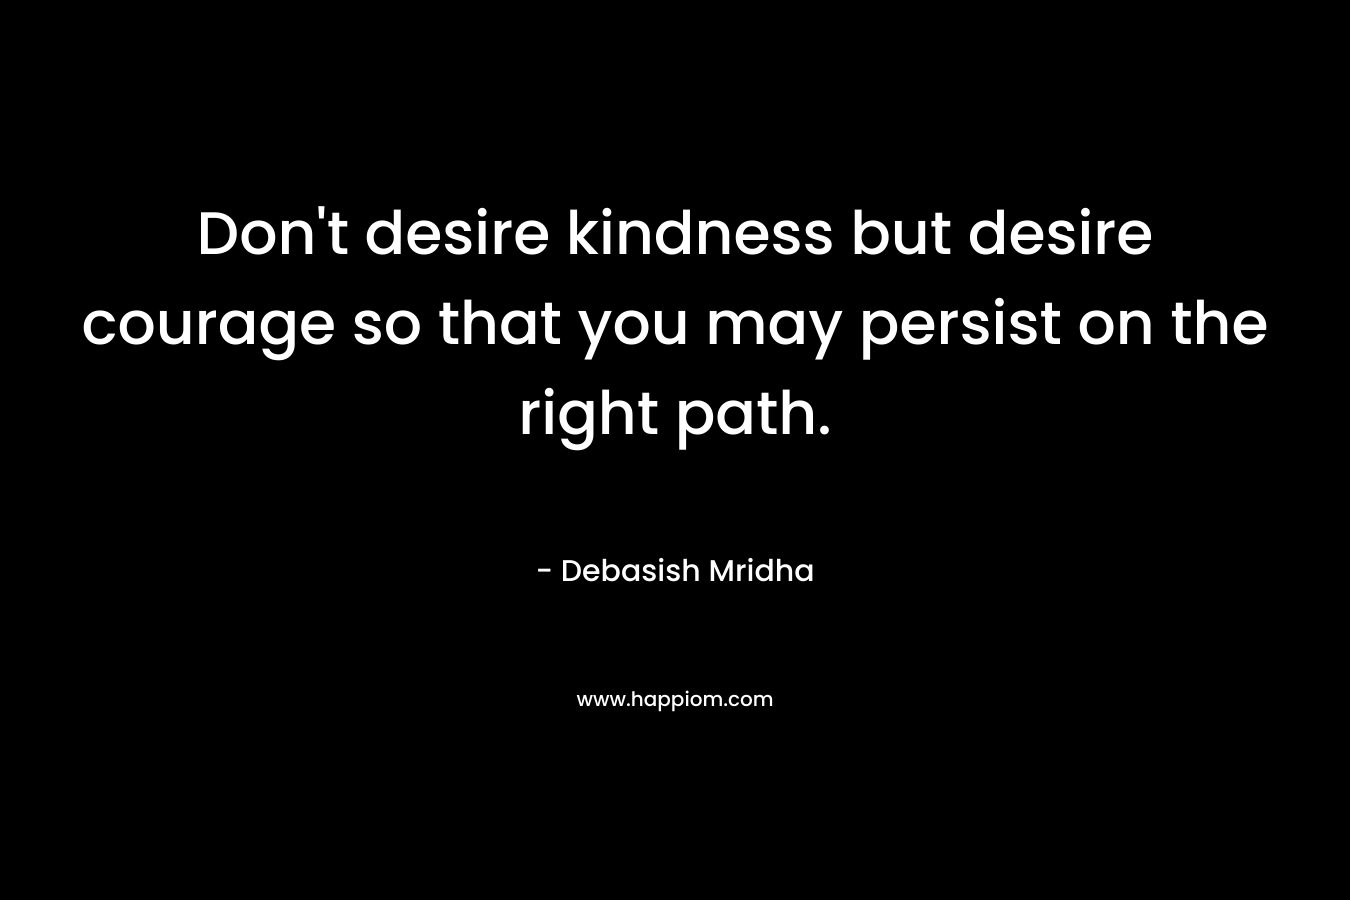 Don't desire kindness but desire courage so that you may persist on the right path.